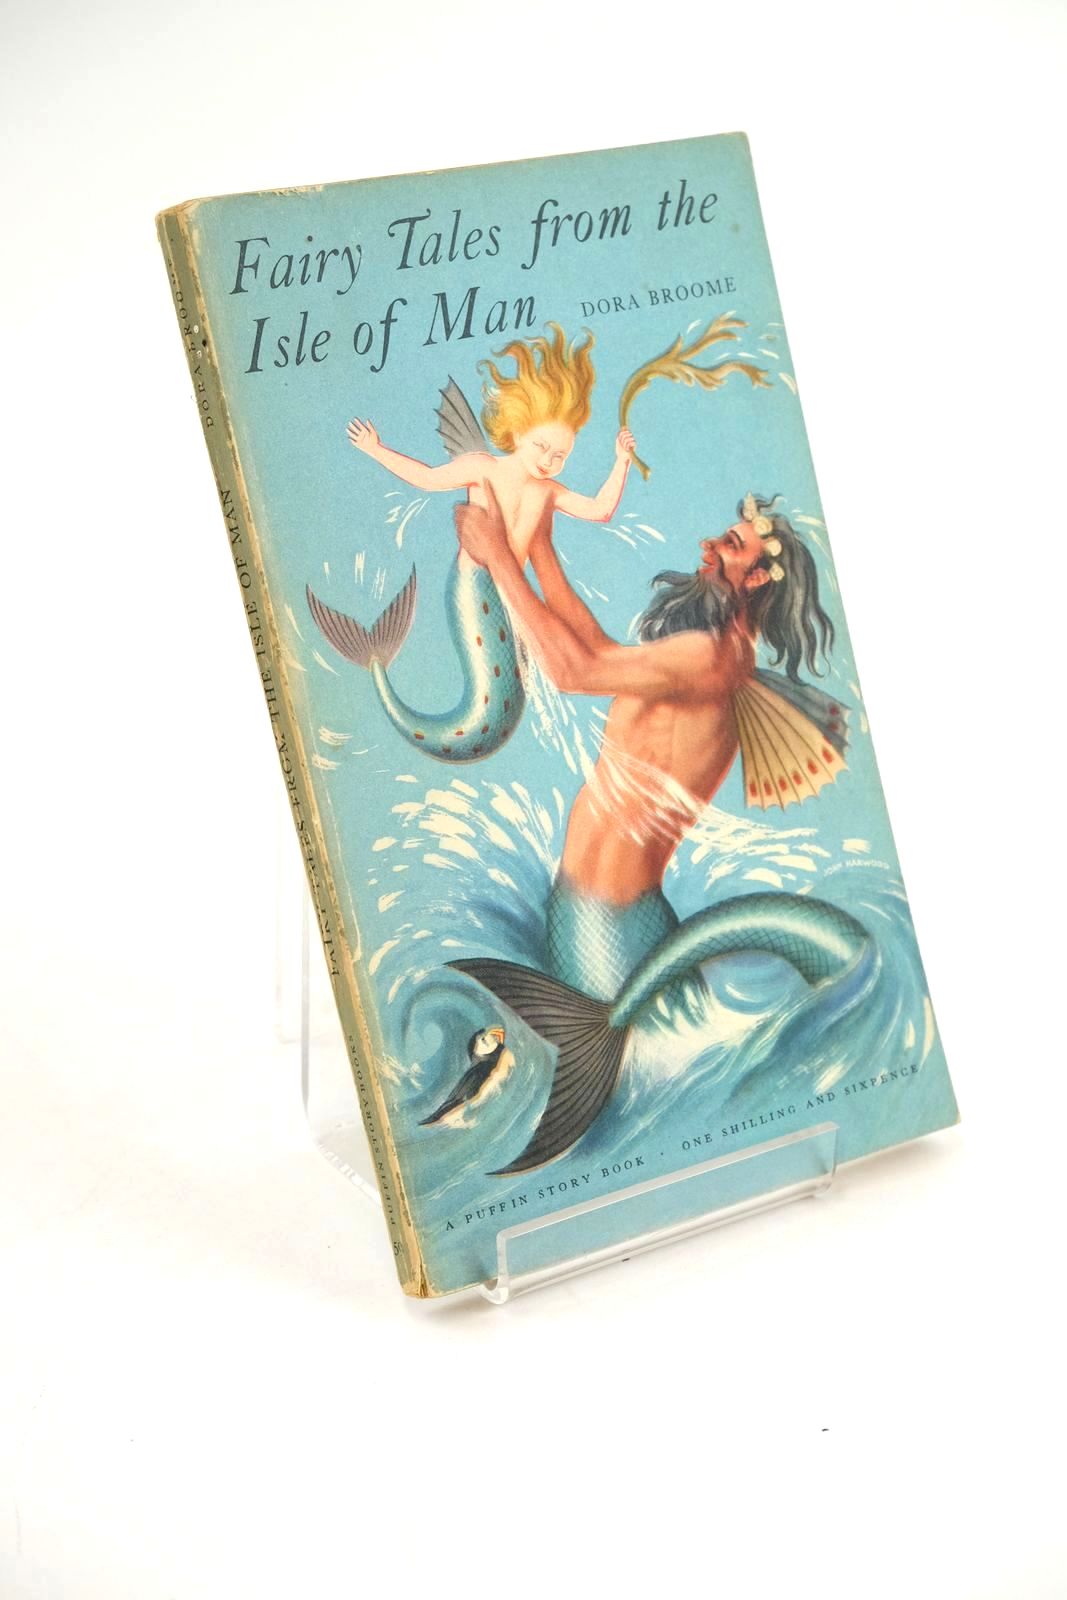 Photo of FAIRY TALES FROM THE ISLE OF MAN written by Broome, Dora illustrated by Harwood, John published by Penguin Books Ltd (STOCK CODE: 1323564)  for sale by Stella & Rose's Books